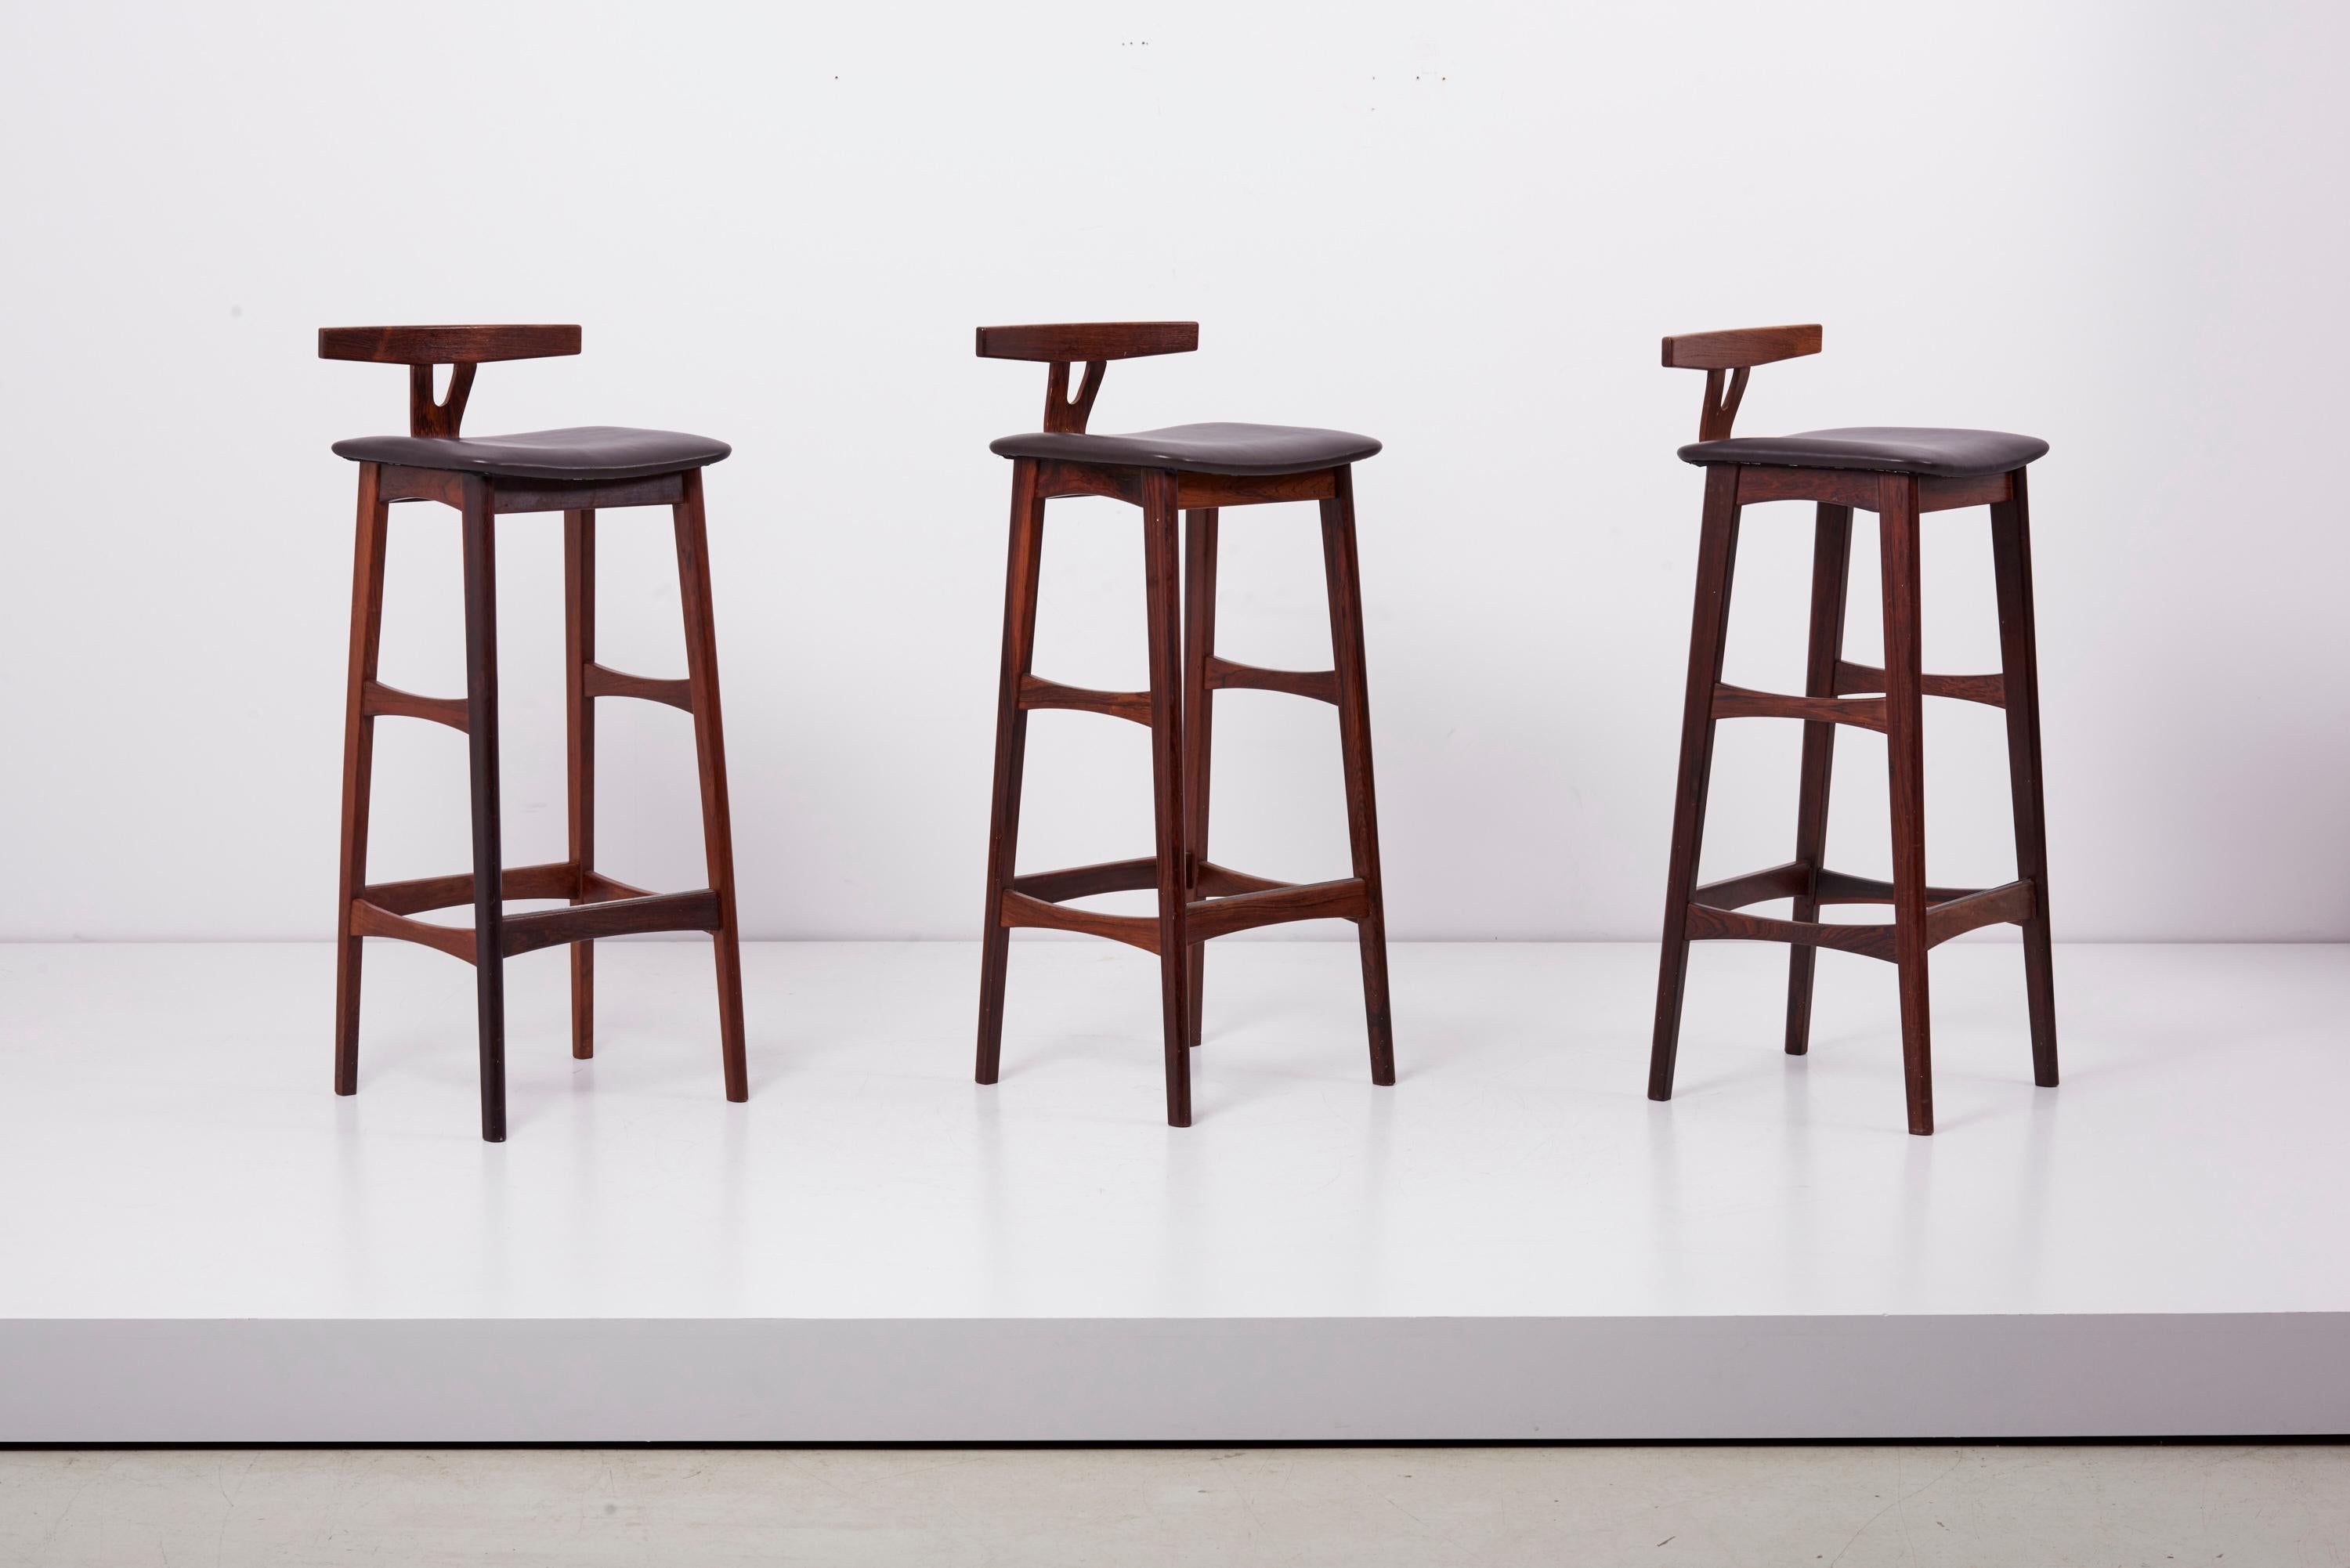 Set of three barstools with low T back, designed by Erik Buch in 1960s and manufactured by Dyrlund in Denmark (labeled). Made of wood / plywood and professionally reupholstered in matching dark brown Sorensen leather - great condition.